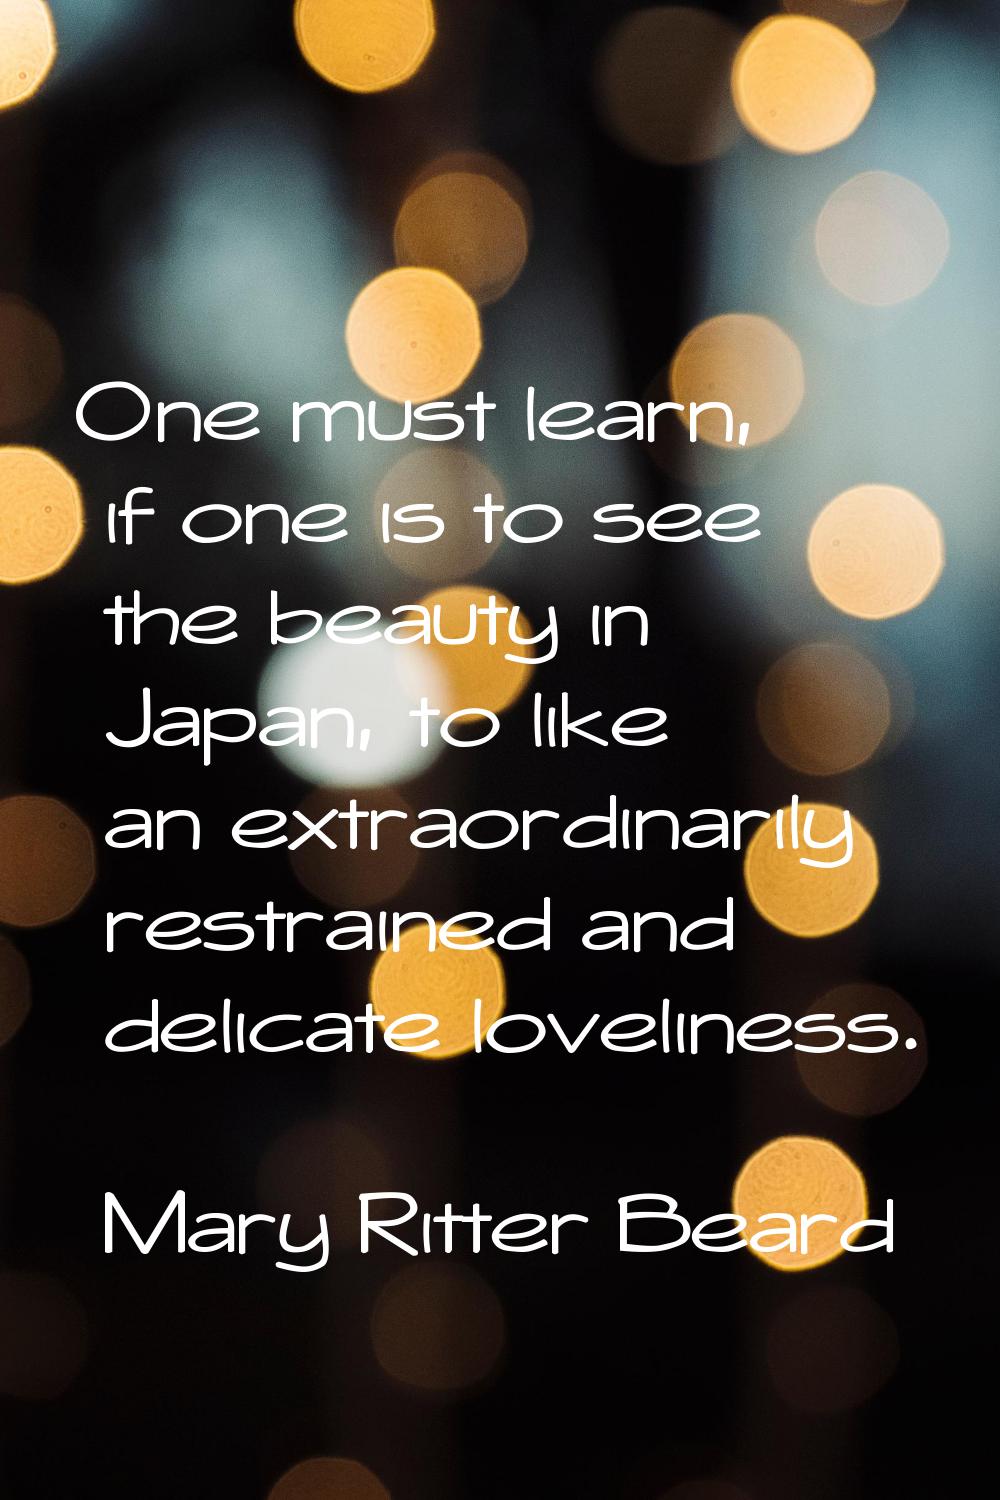 One must learn, if one is to see the beauty in Japan, to like an extraordinarily restrained and del